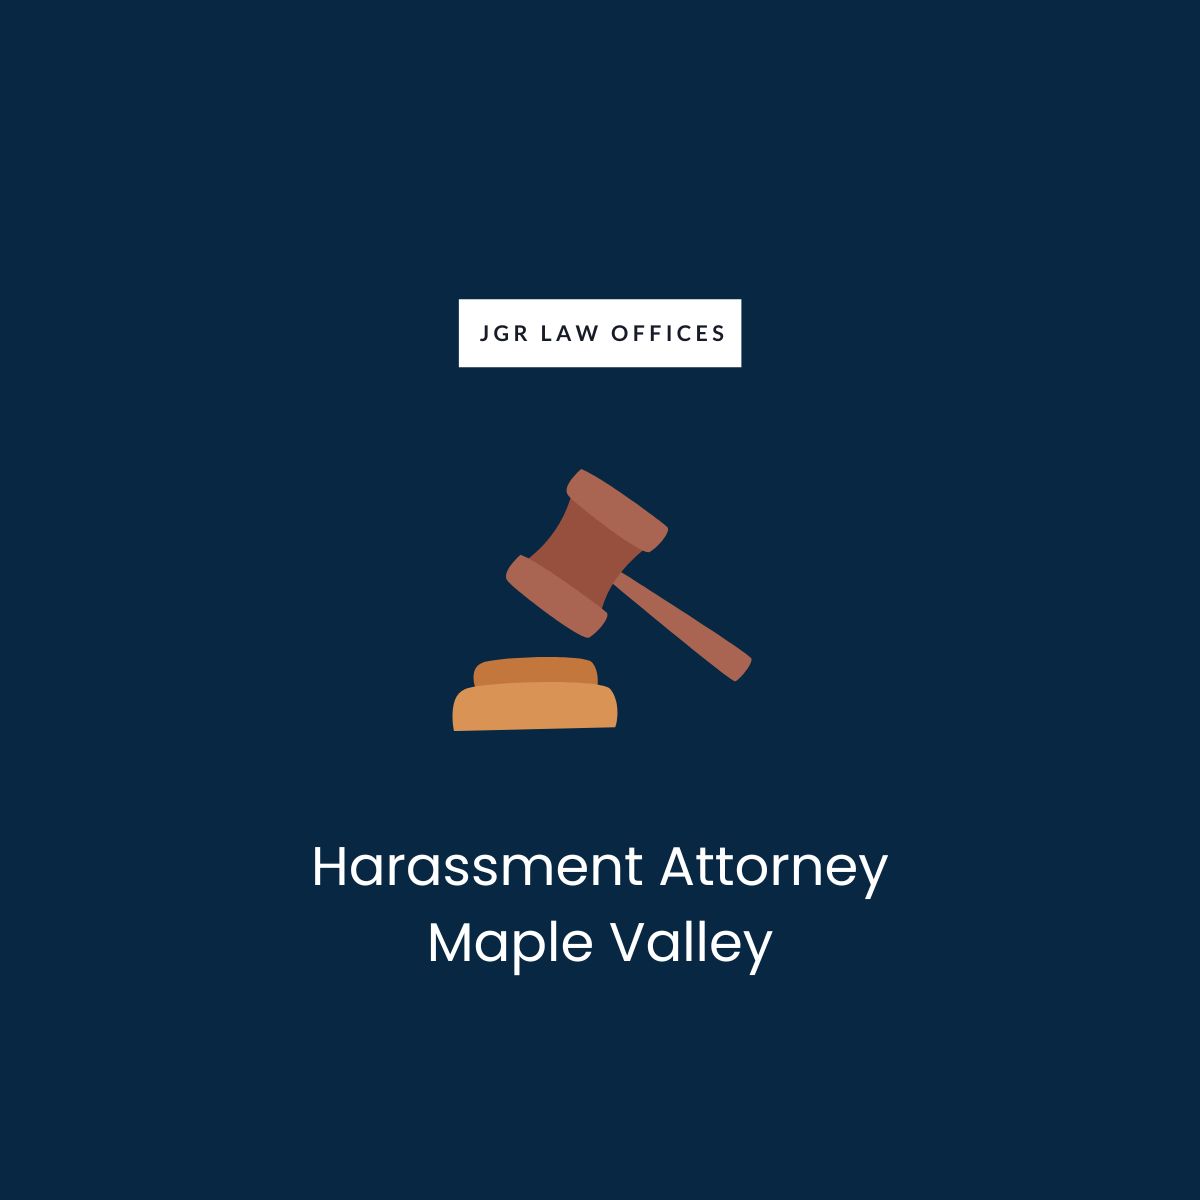 Harassment Lawyer Maple Valley Harassment